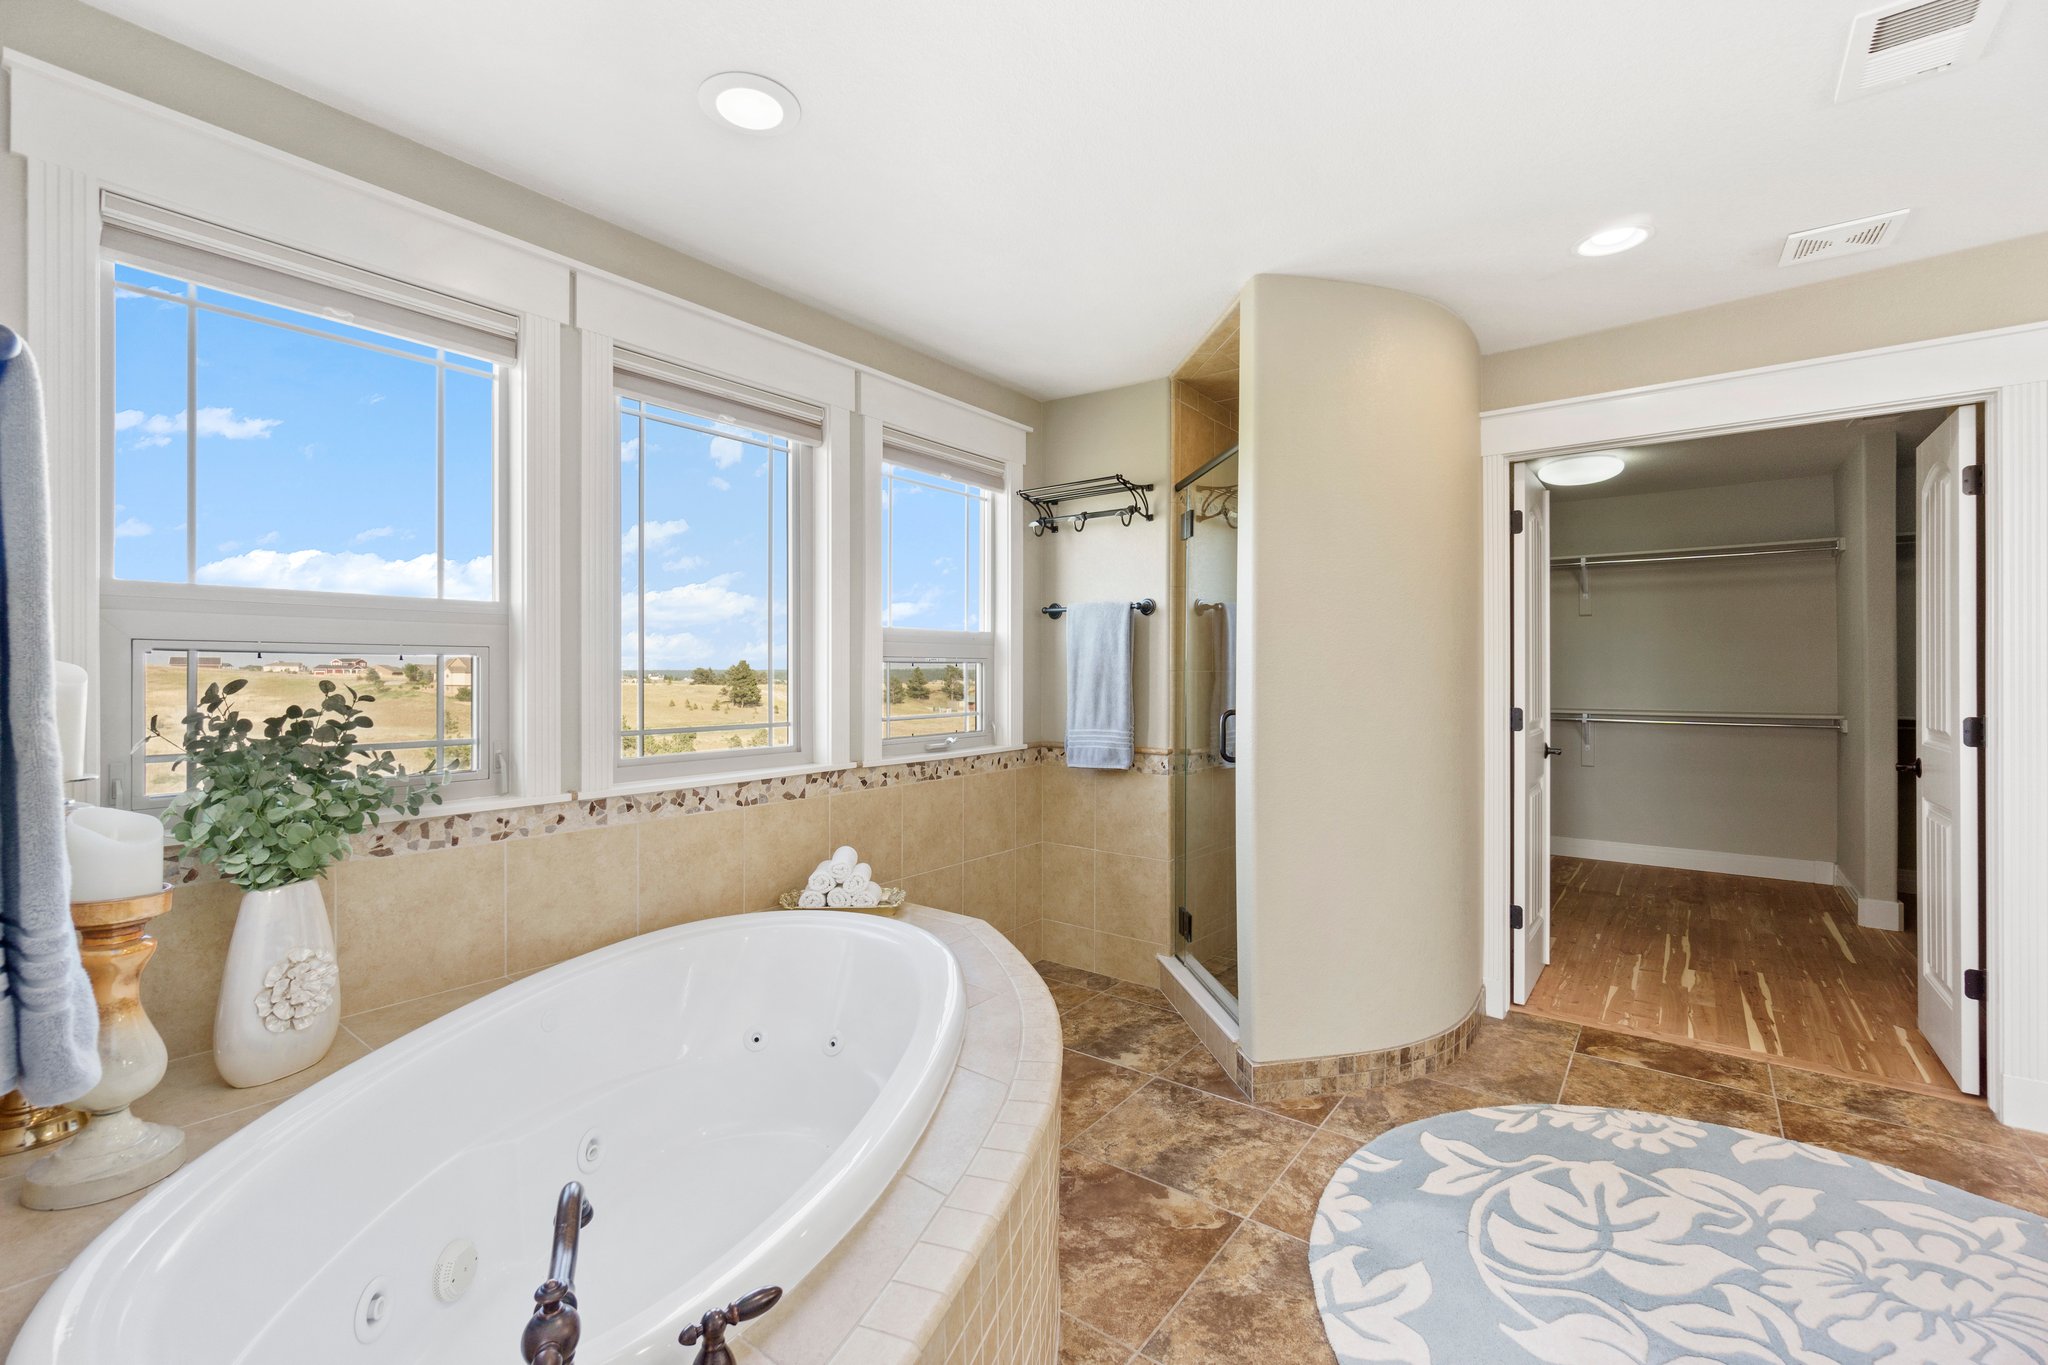 Standing glass shower~ Large soaking tub~ Huge walk-in closet with bamboo flooring